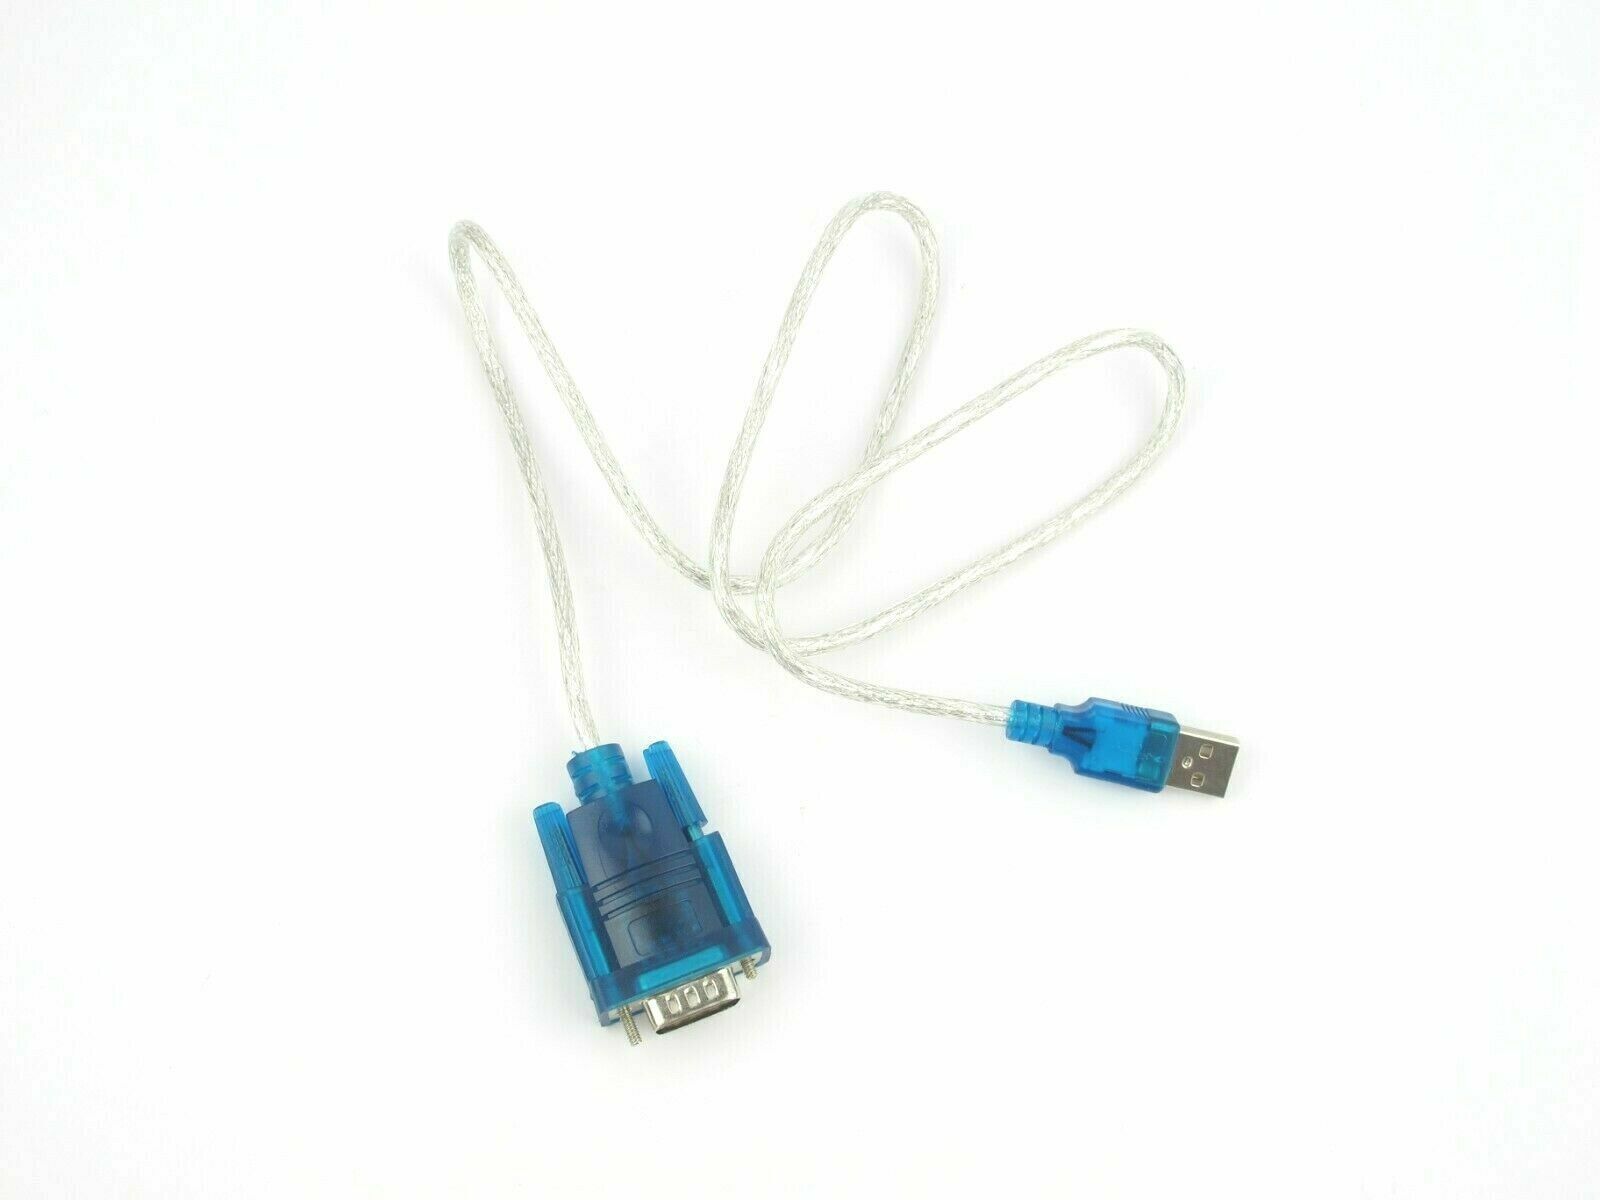 2 Pack USB 2.0 to RS232 Serial 9 Pin 9P DB9 Adapter Converter Cable Cord New Unbranded Does not apply - фотография #3